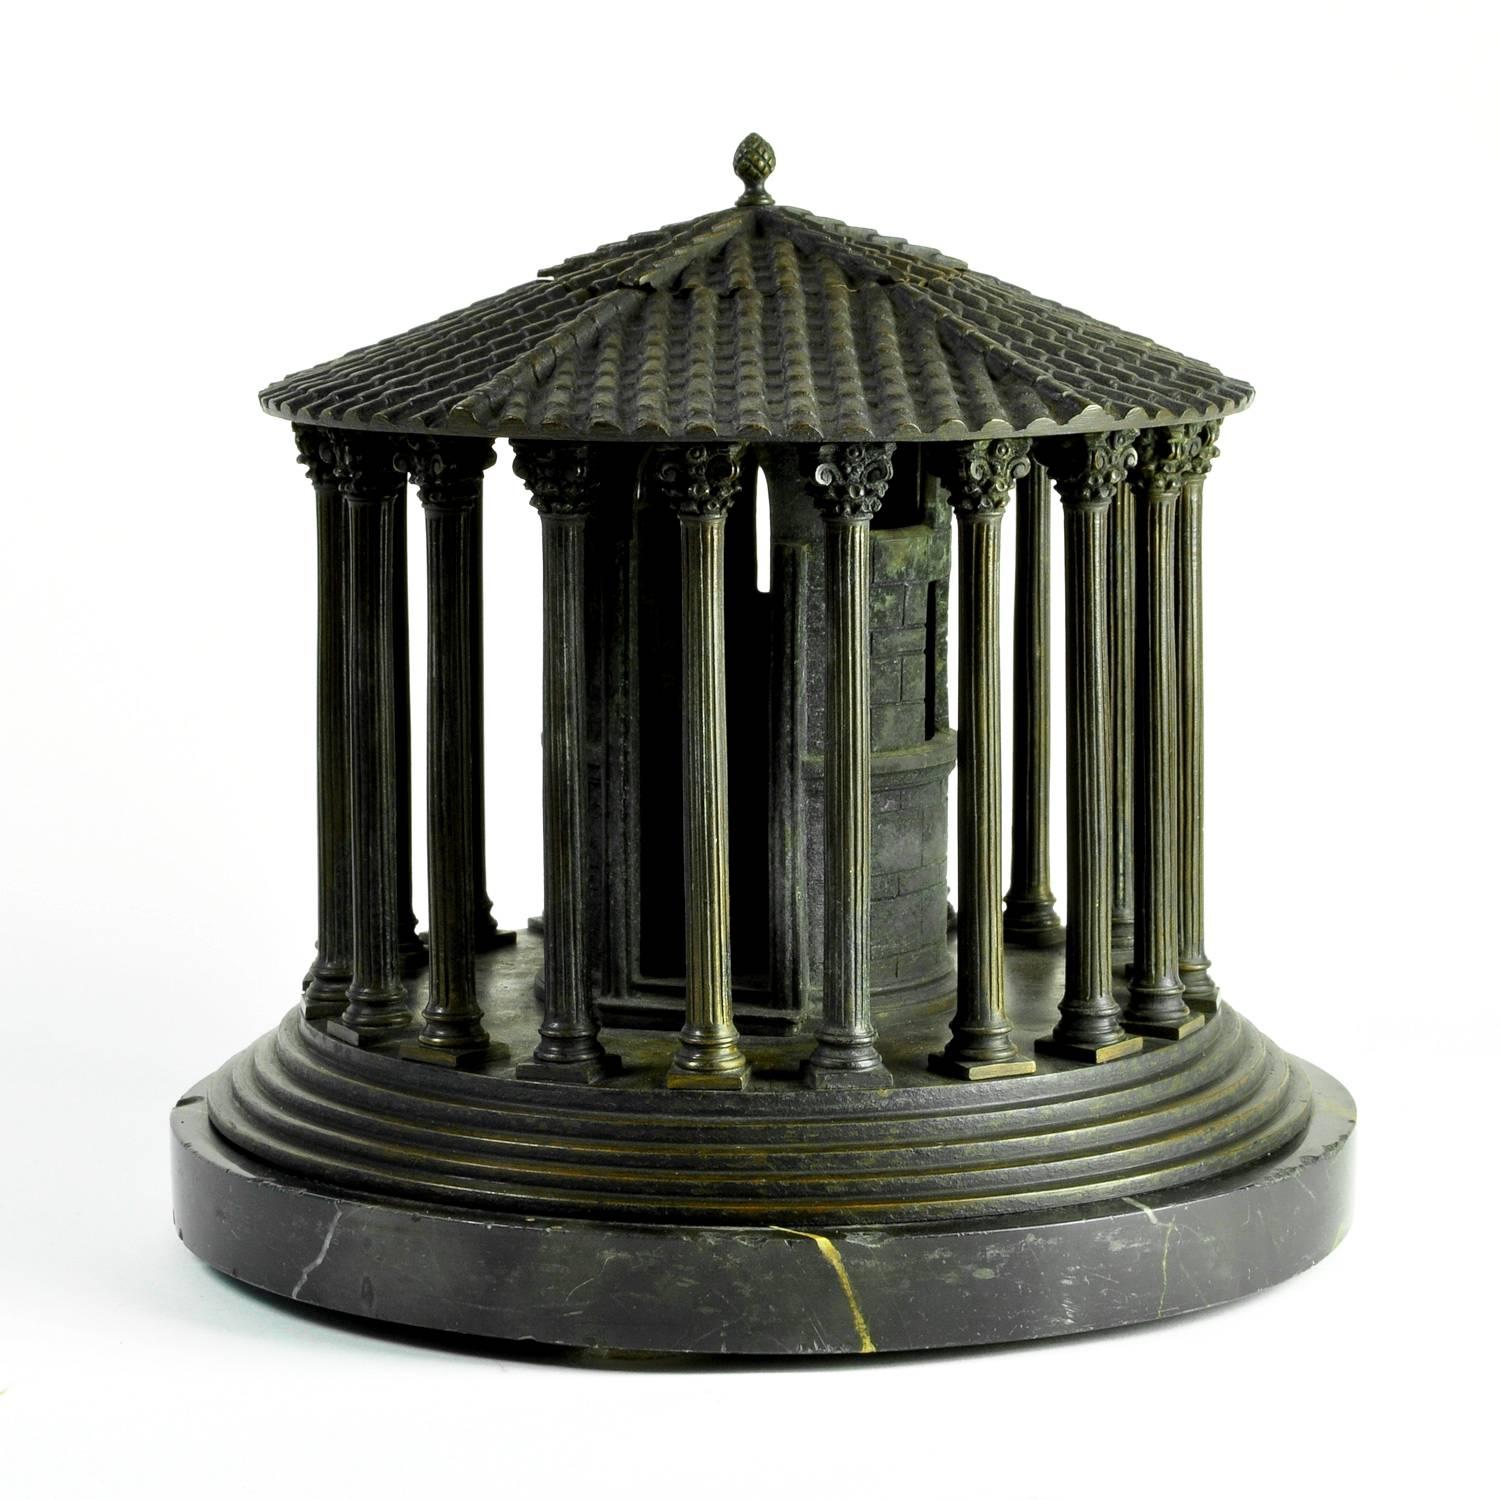 Grand Tour model of the temple of Hercules Victor, usually referred to as the Temple of Vesta.

While familiar with the many small models of this subject, often turned out as inkwells, we were unprepared for the sheer extent of this 8” tall,